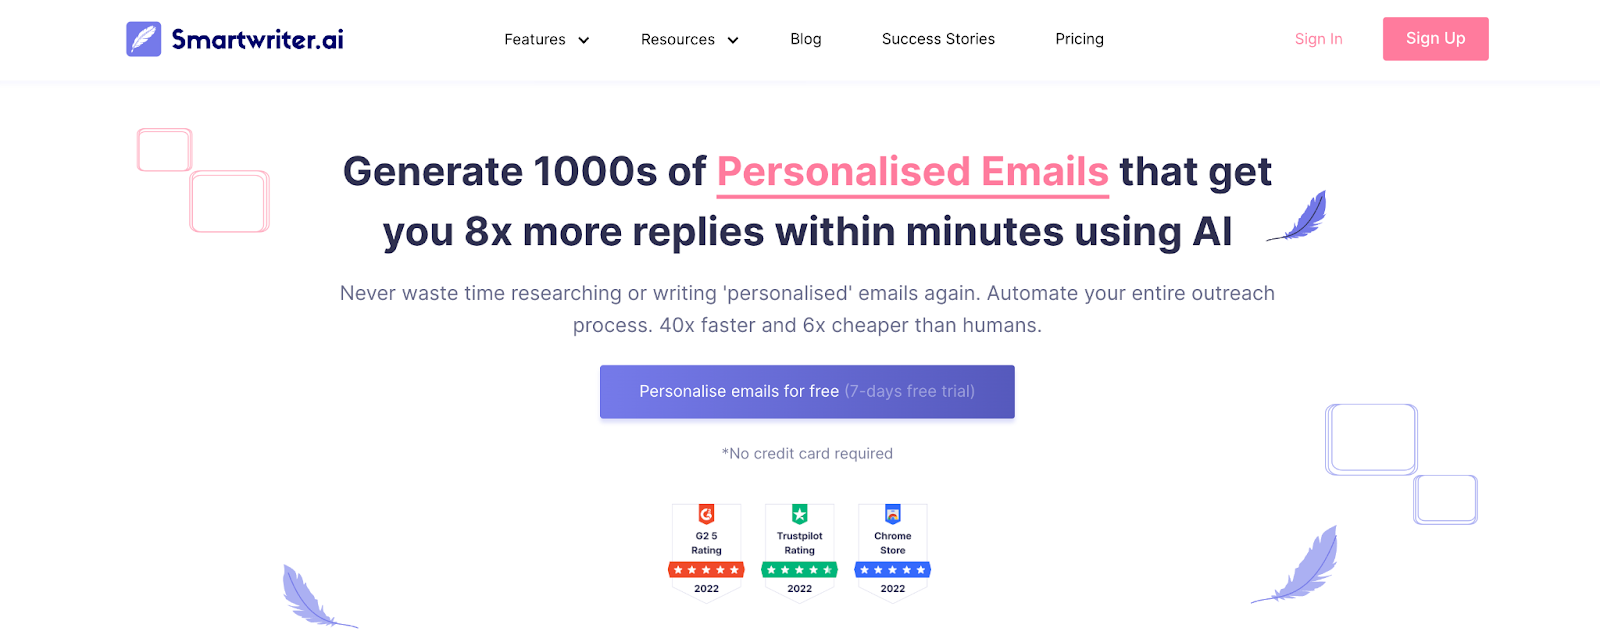 smartwriter ai homepage with text: generate 1000s of personalised emails that get you 8x more replies within minutes